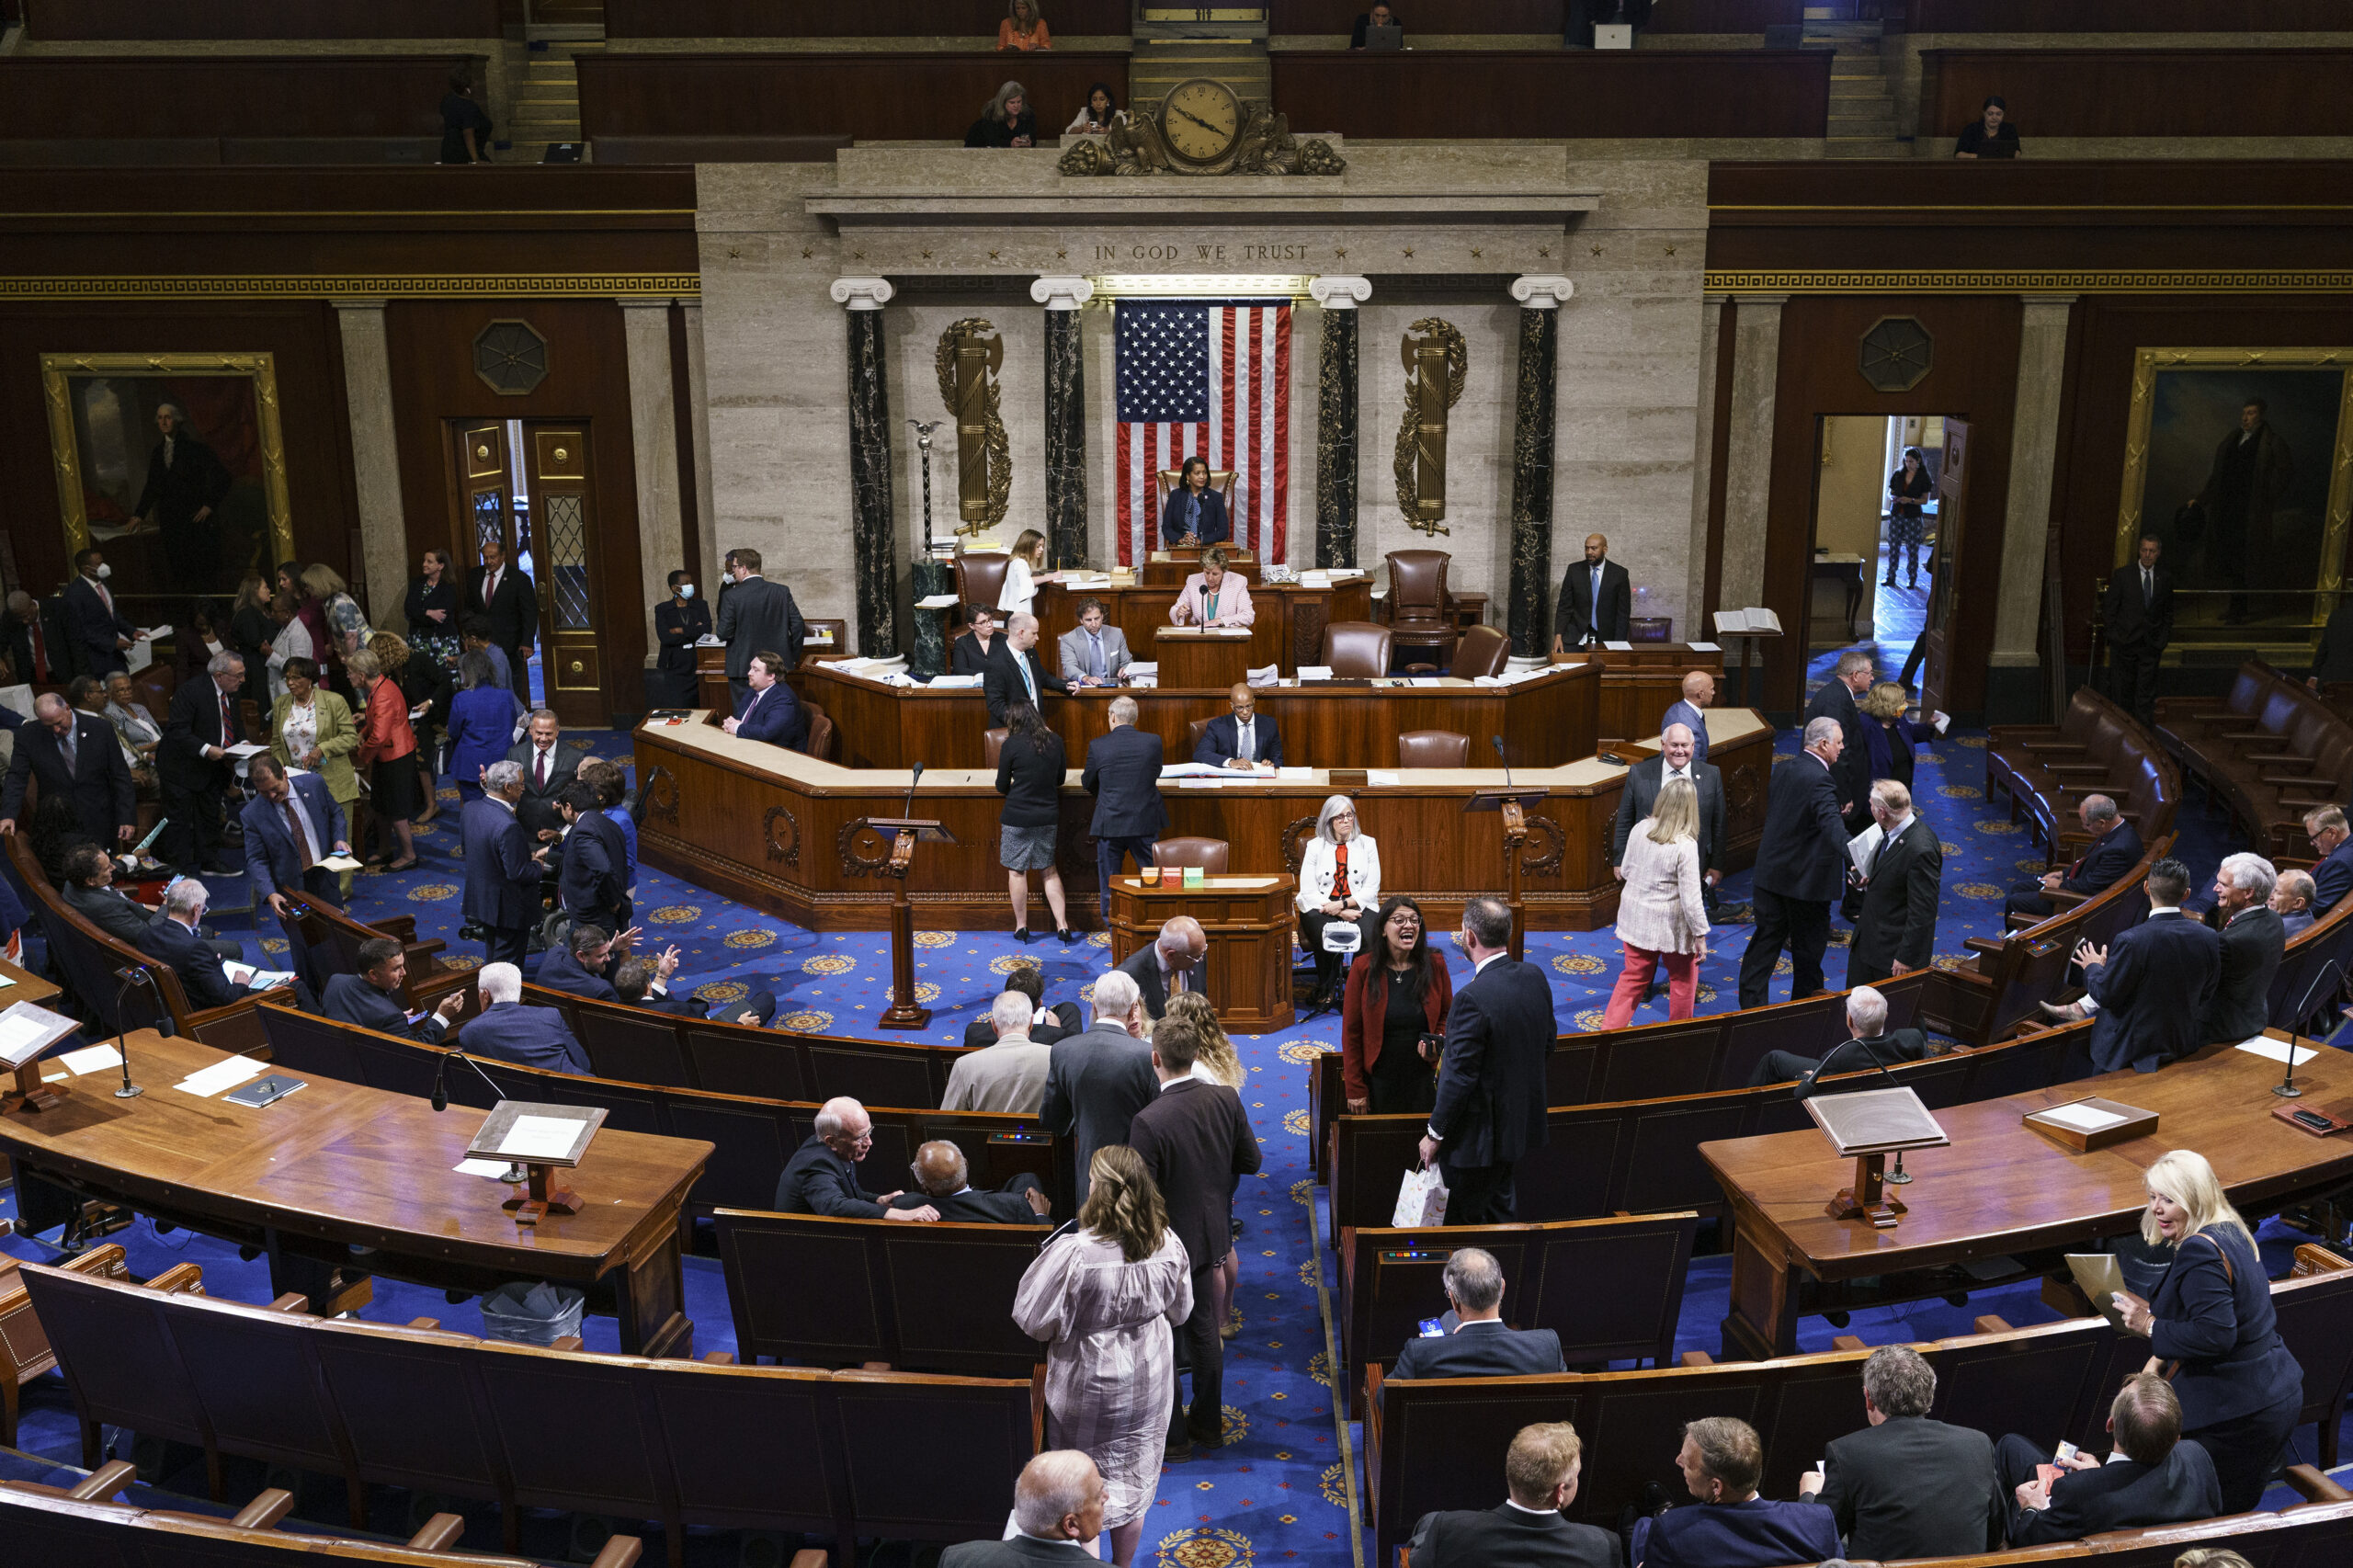 FILE - Members of the House of Representatives gather in the chamber to vote on creation of a select committee to investigate the Jan. 6 Capitol insurrection, at the Capitol in Washington, on June 30, 2021. (AP Photo/J. Scott Applewhite, File)